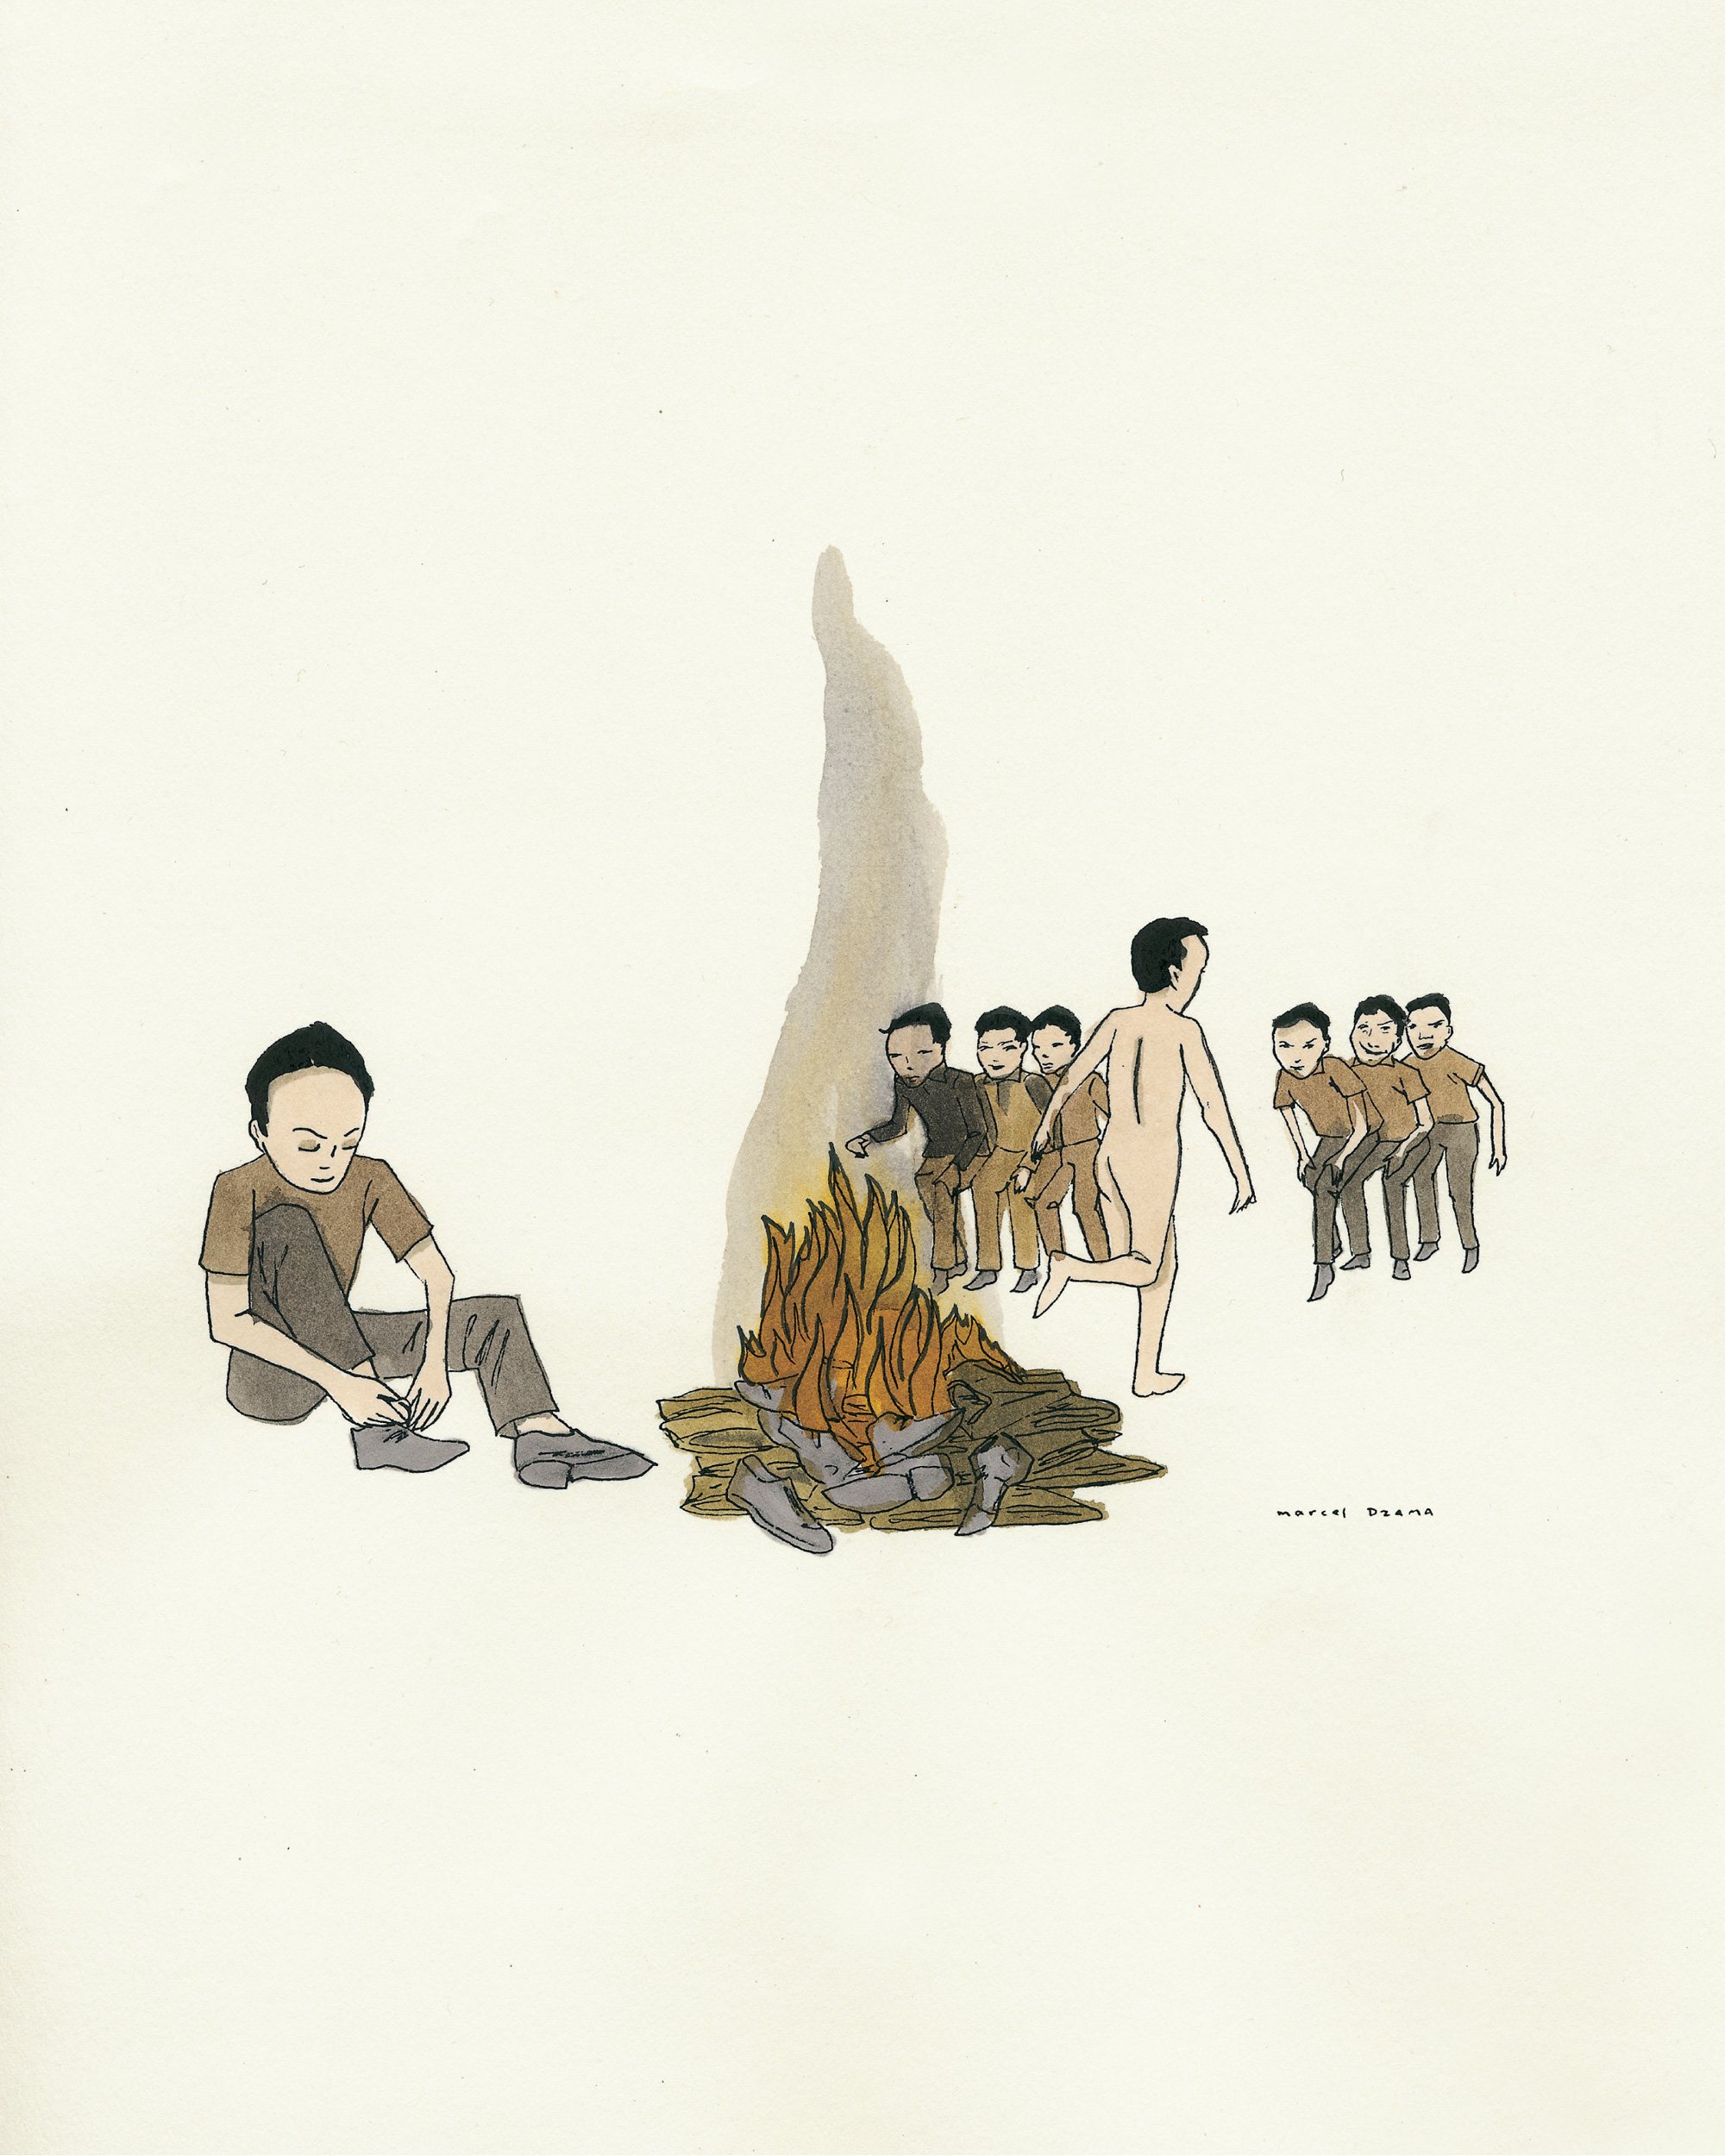 A 2002 drawing of children by Marcel Dzama.